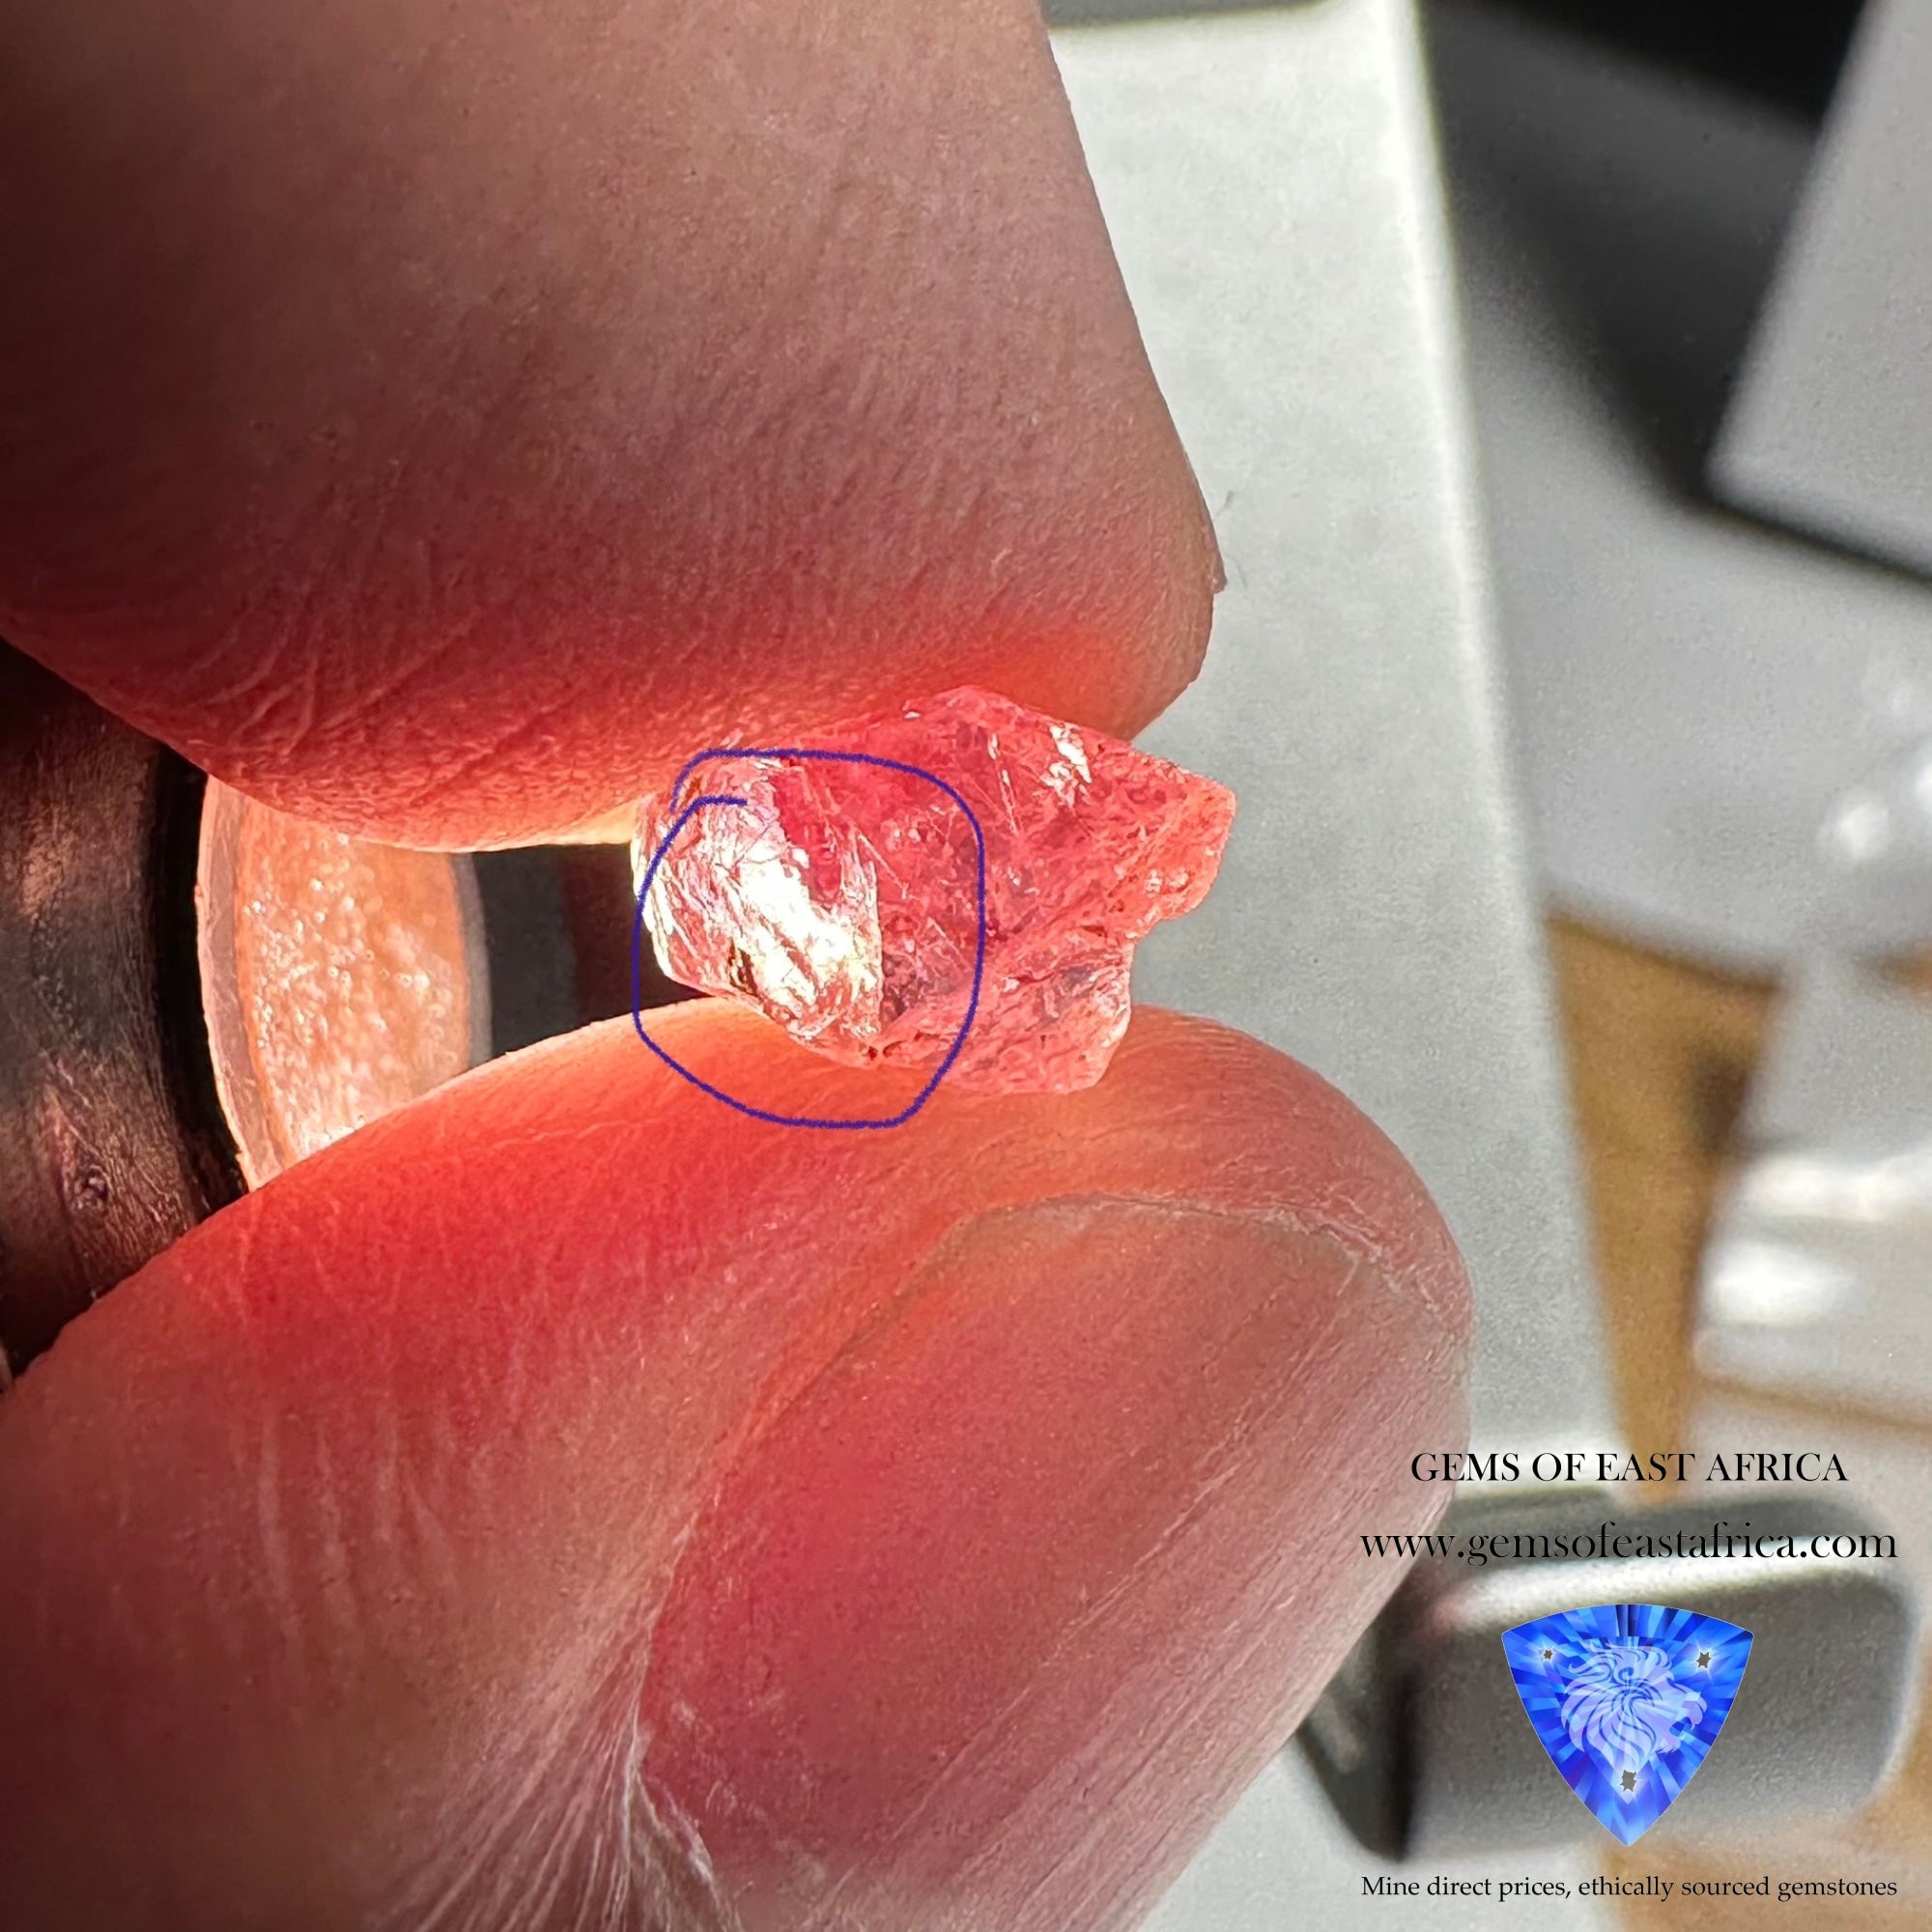 2.13Ct Winza Sapphire Tanzania Untreated Unheated. Crack On Side See Pictures We Have Marked The